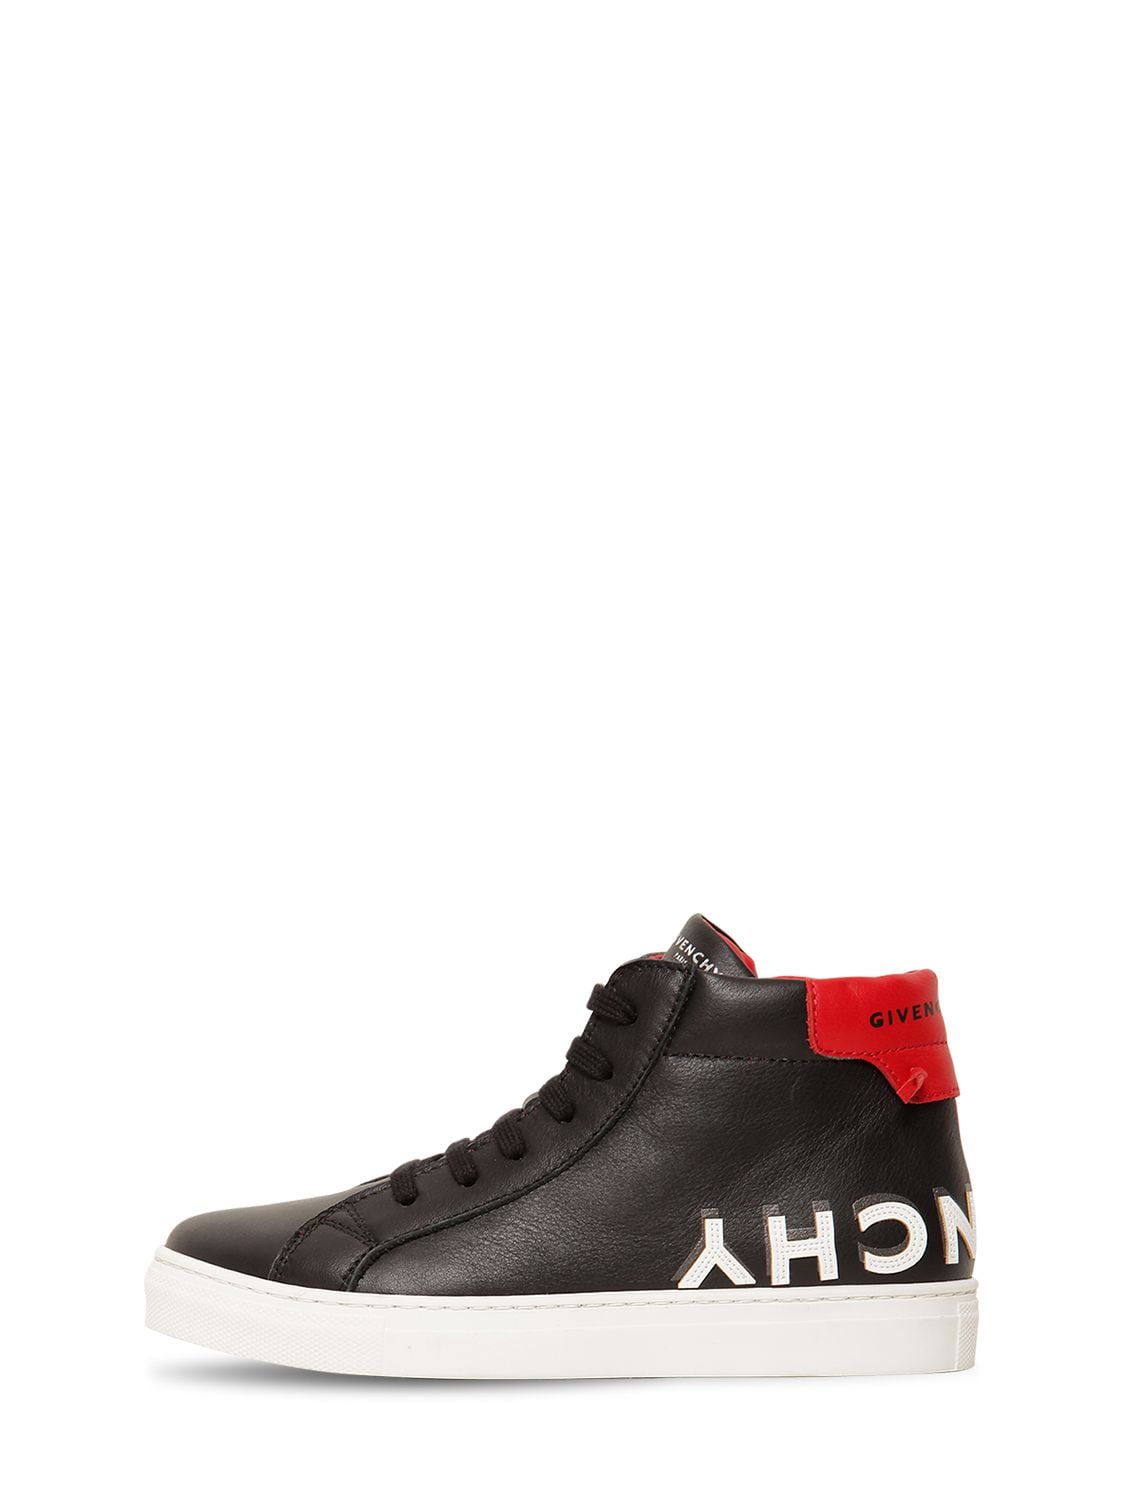 GIVENCHY LOGO PRINTED LEATHER HIGH TOP trainers,70IOFL091-MDLC0